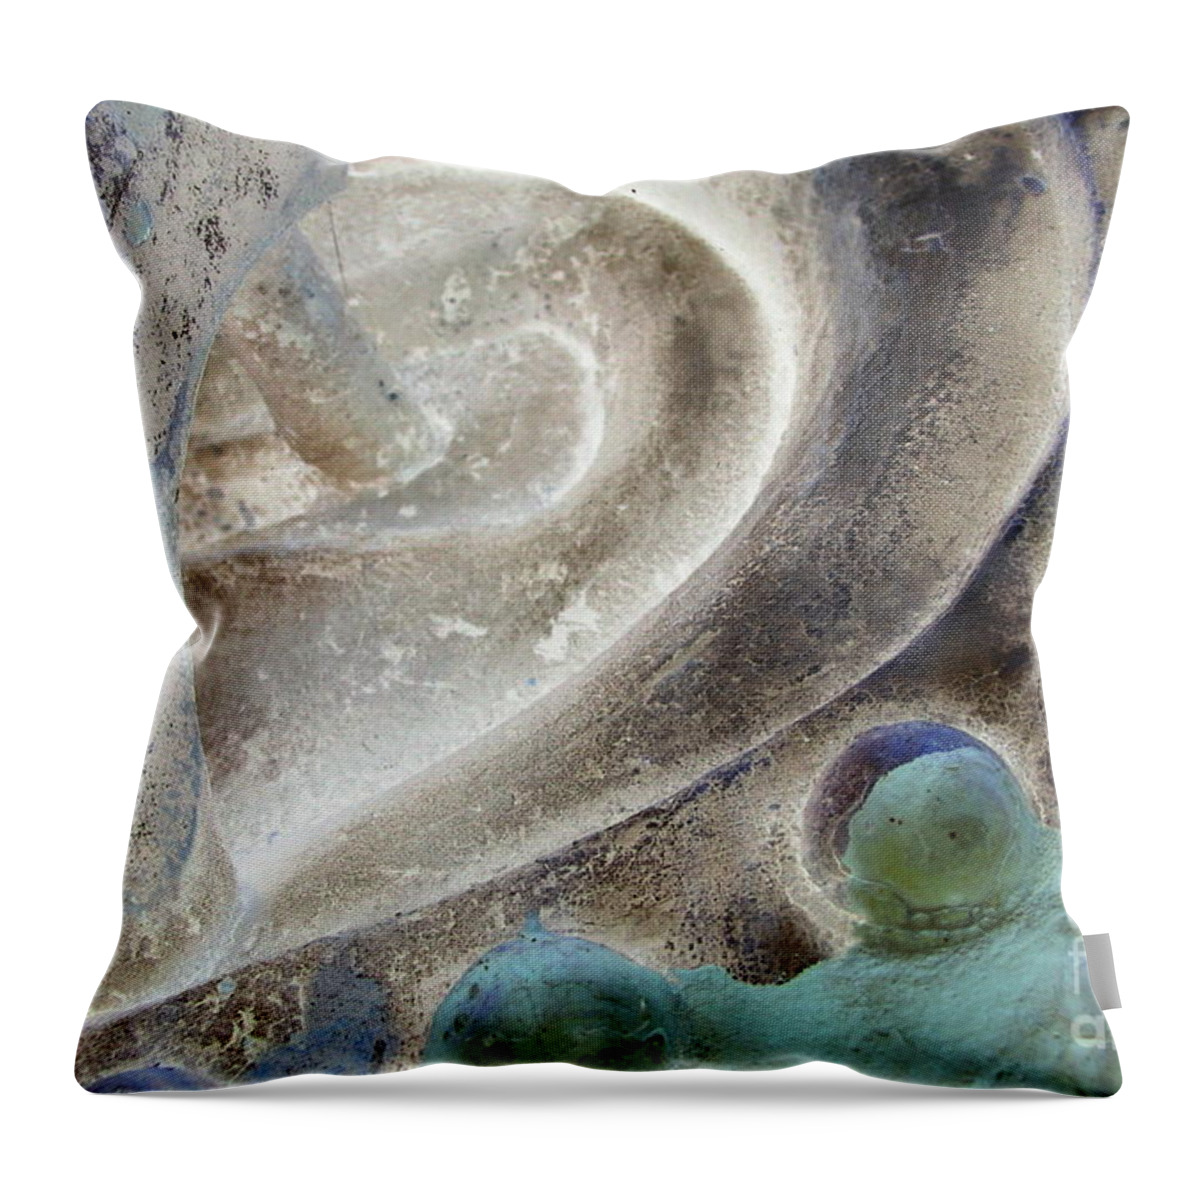 Heart Throw Pillow featuring the photograph Heart Locked In by Heather Kirk